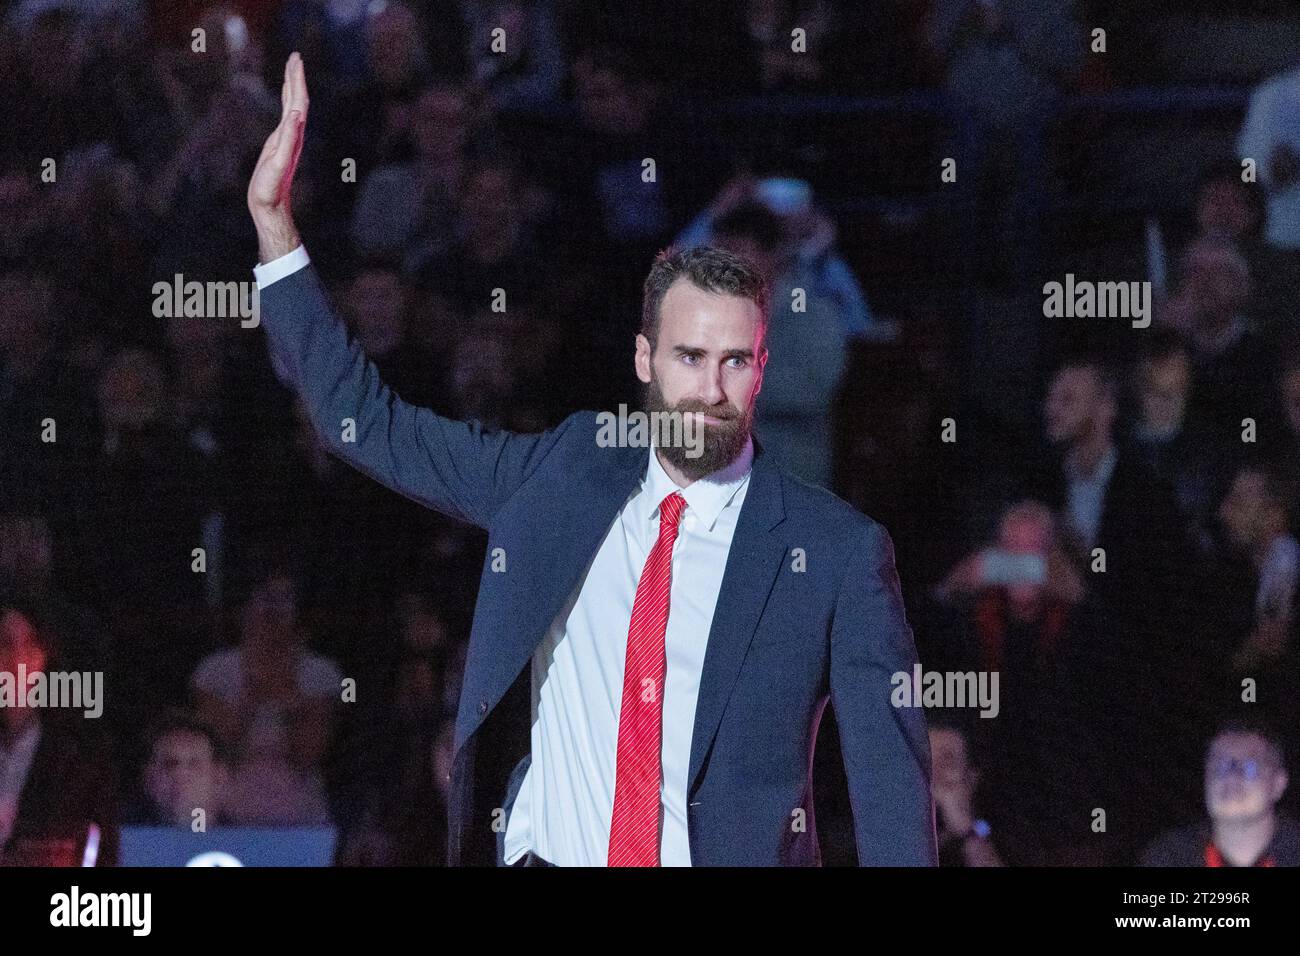 Olimpia Milano - Olympiakos euroleague basket 2023-2024 - Milan october 17 2013 - in the photo- Former basketball player Gigi Datome delivers a speech as he is inducted in the Pallacanestro Olimpia Milano Hall of Fame Credit: Kines Milano/Alamy Live News Stock Photo